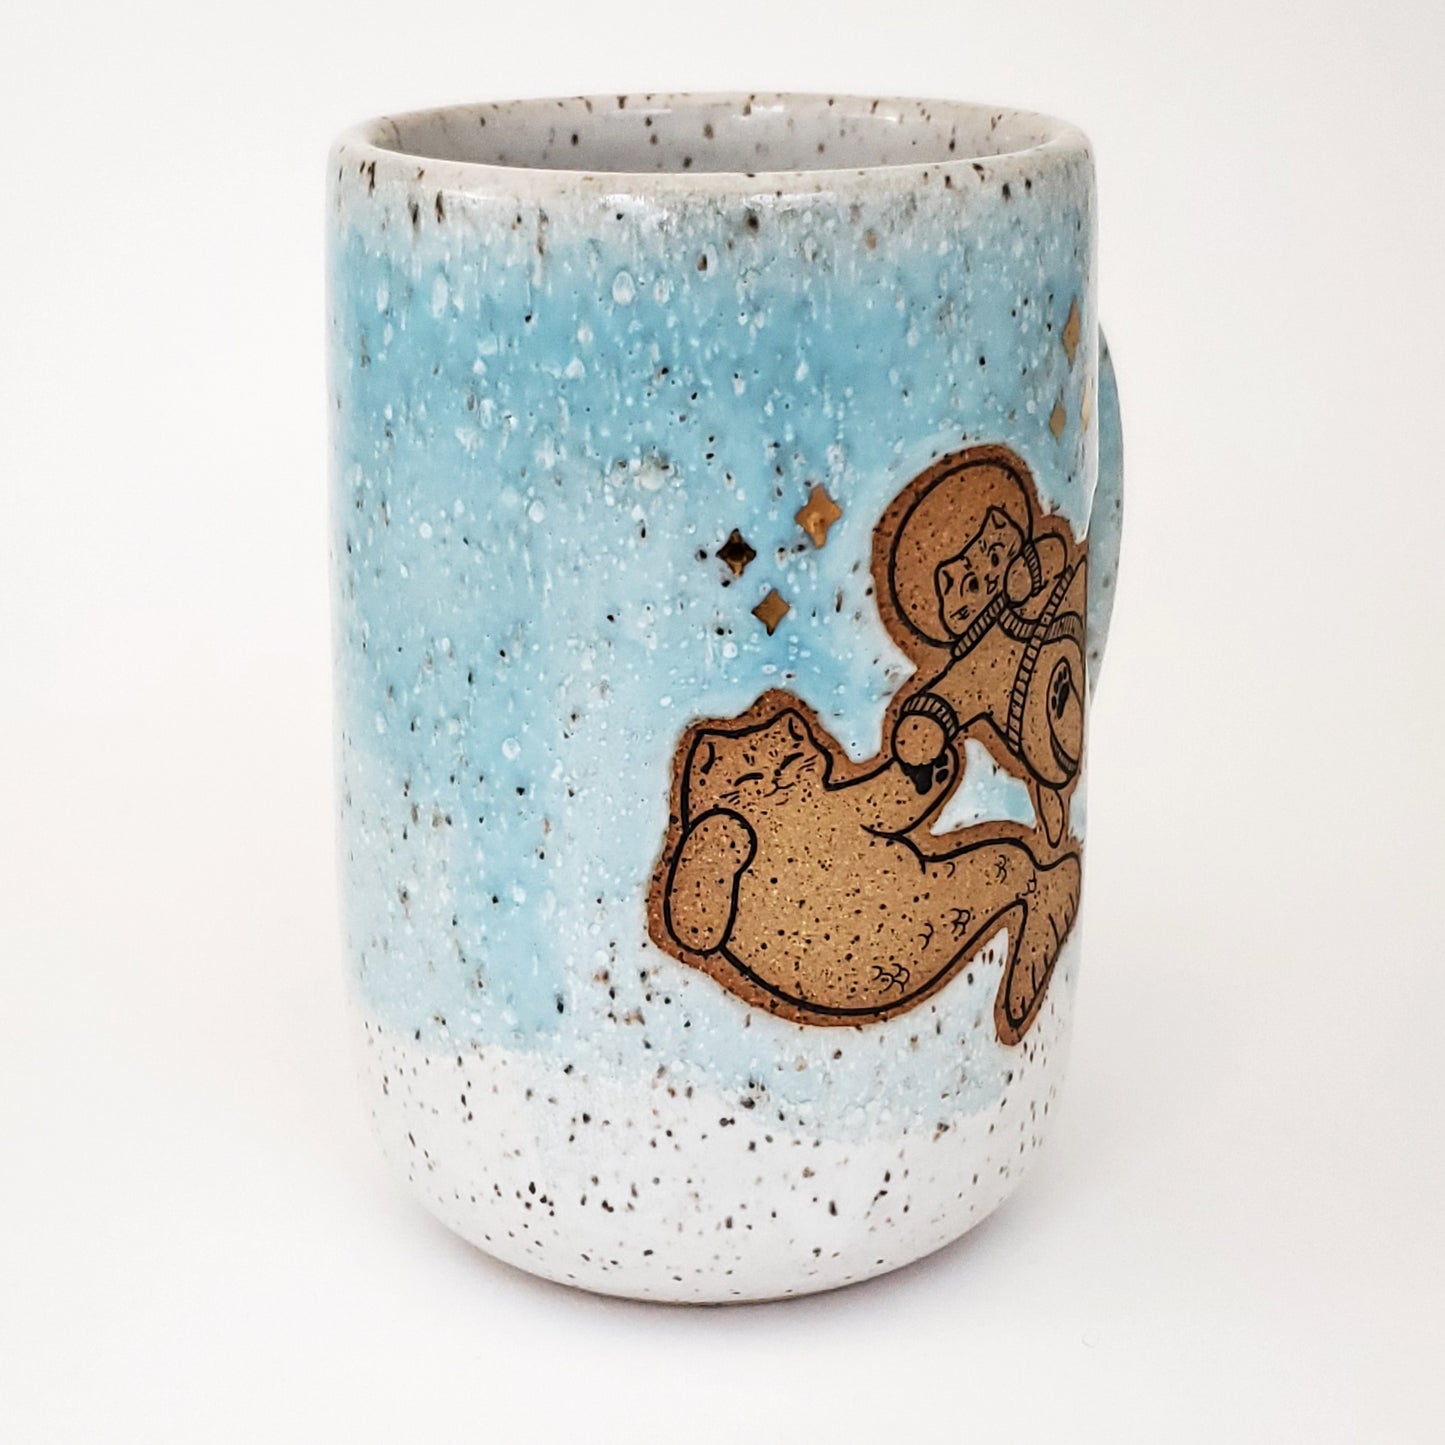 16 oz Space Boy and Prince of The Sea Mug in Blue